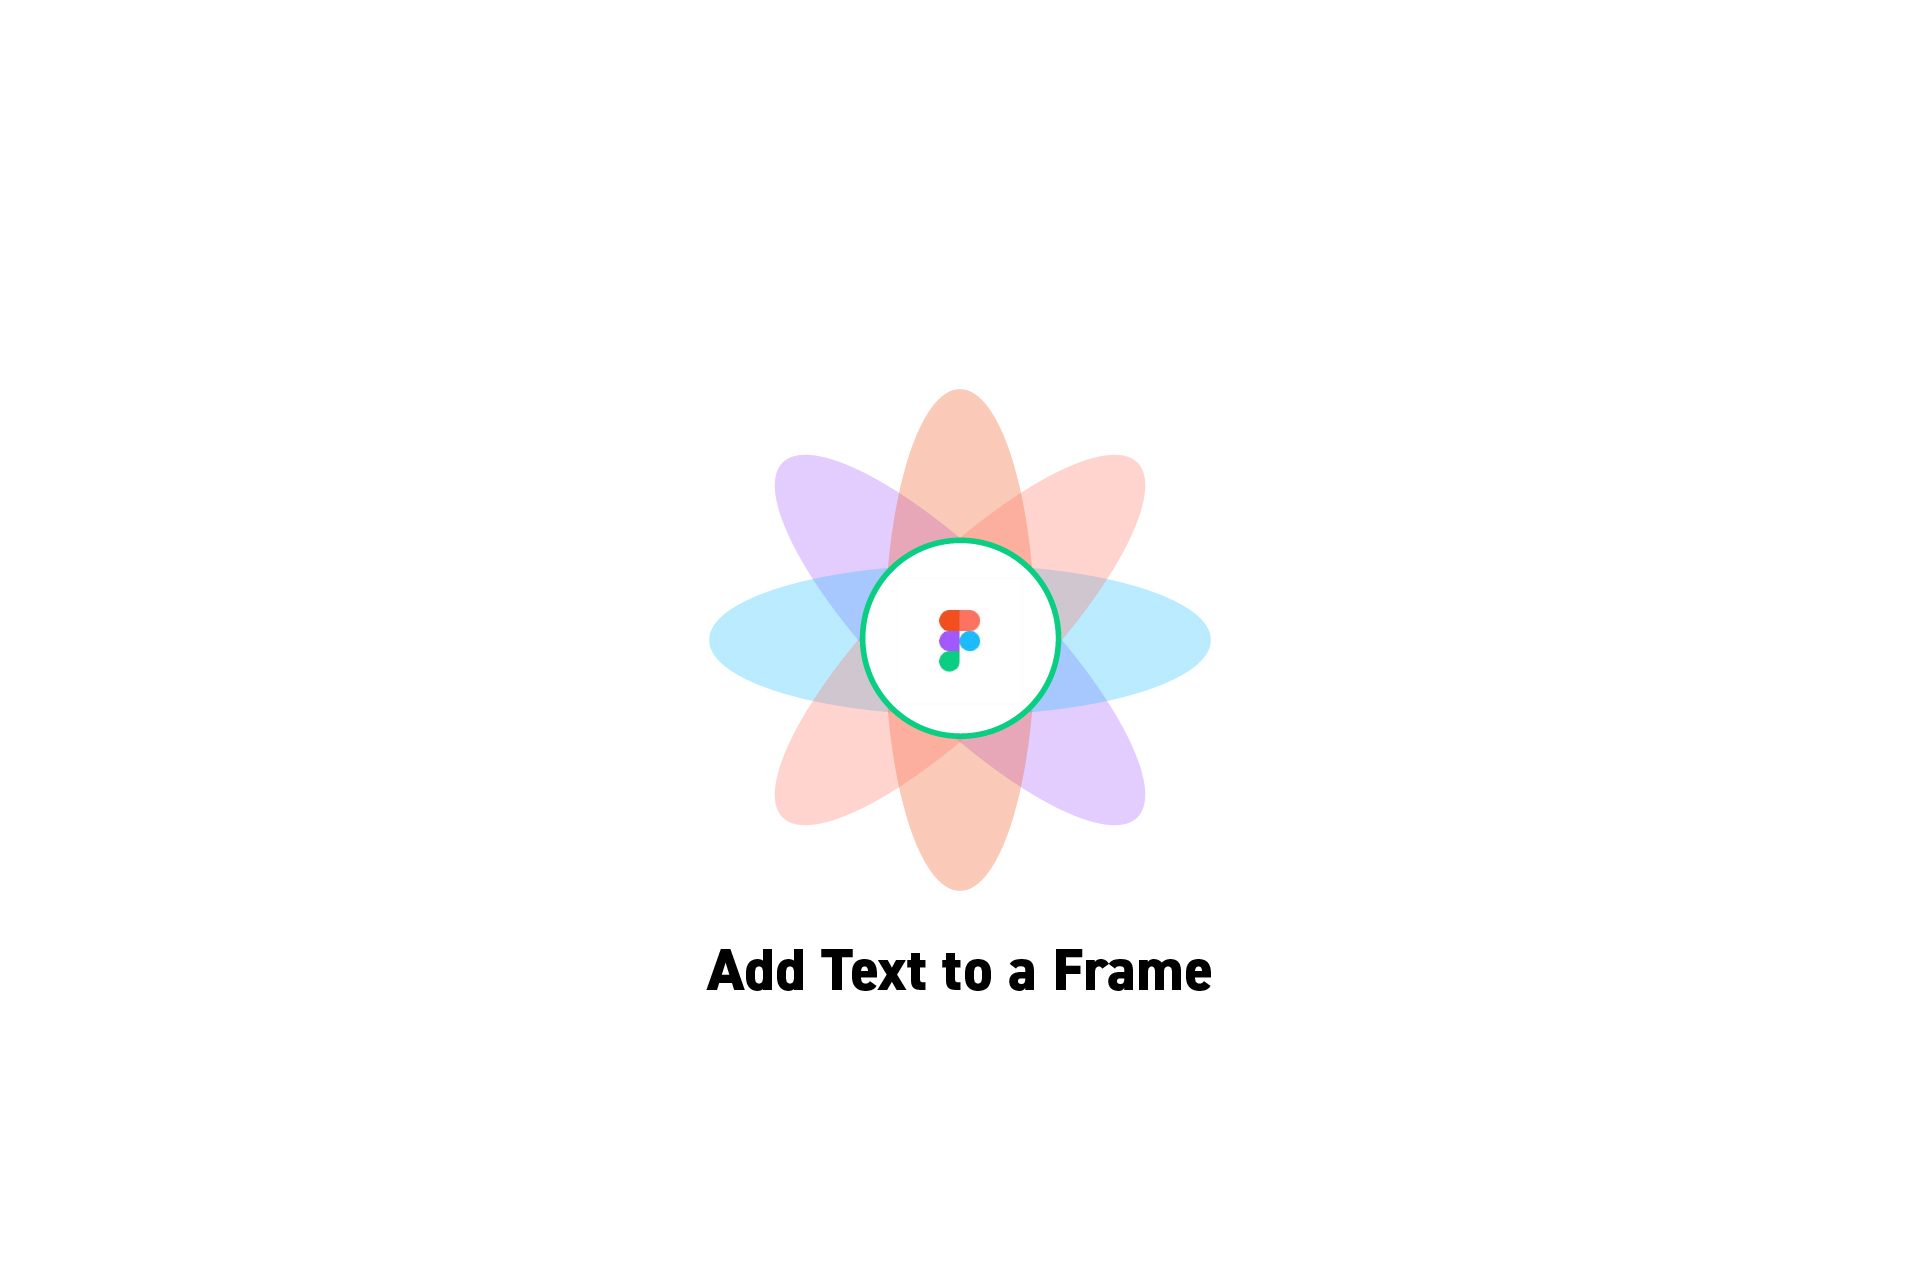 A flower that represents Figma with the text “Add Text to a Frame” beneath it.